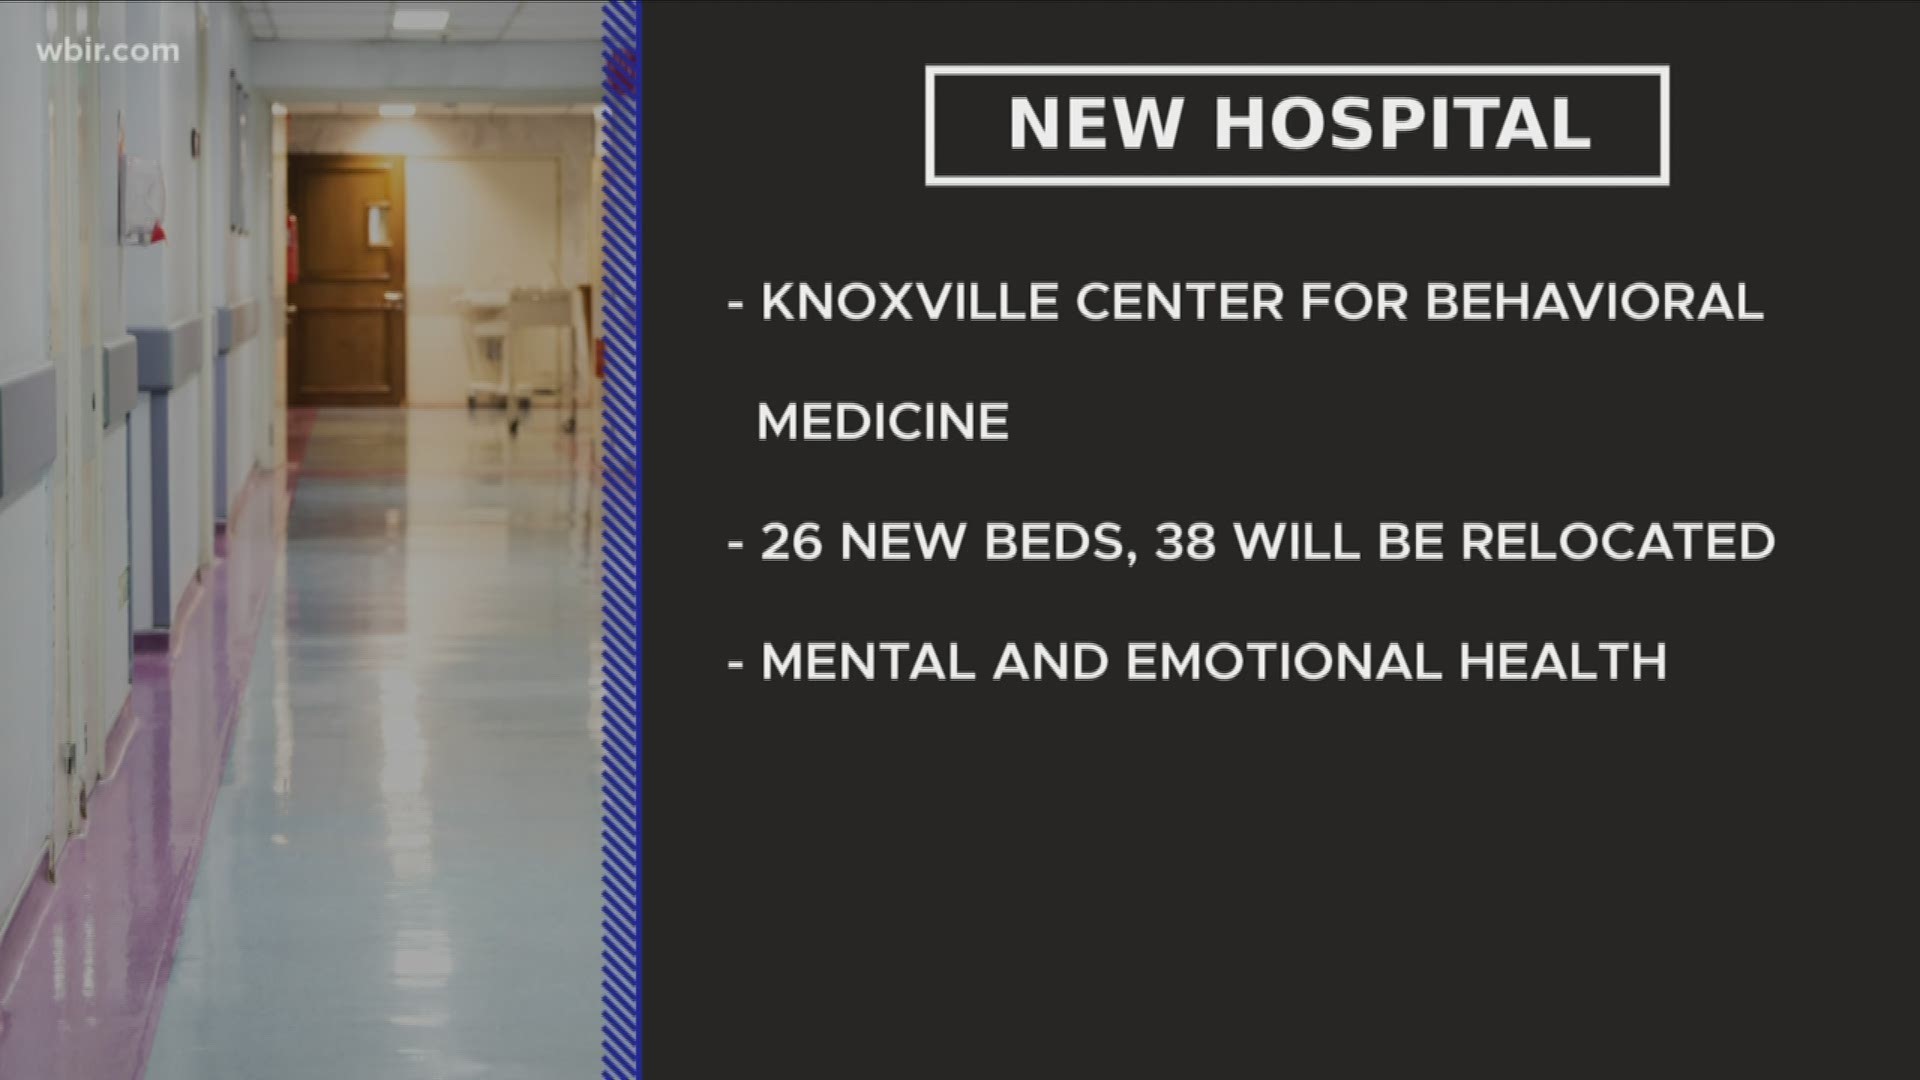 The 64-bed psychiatric hospital will be located right next to a new Rehabilitation Hospital, which was announced last year.